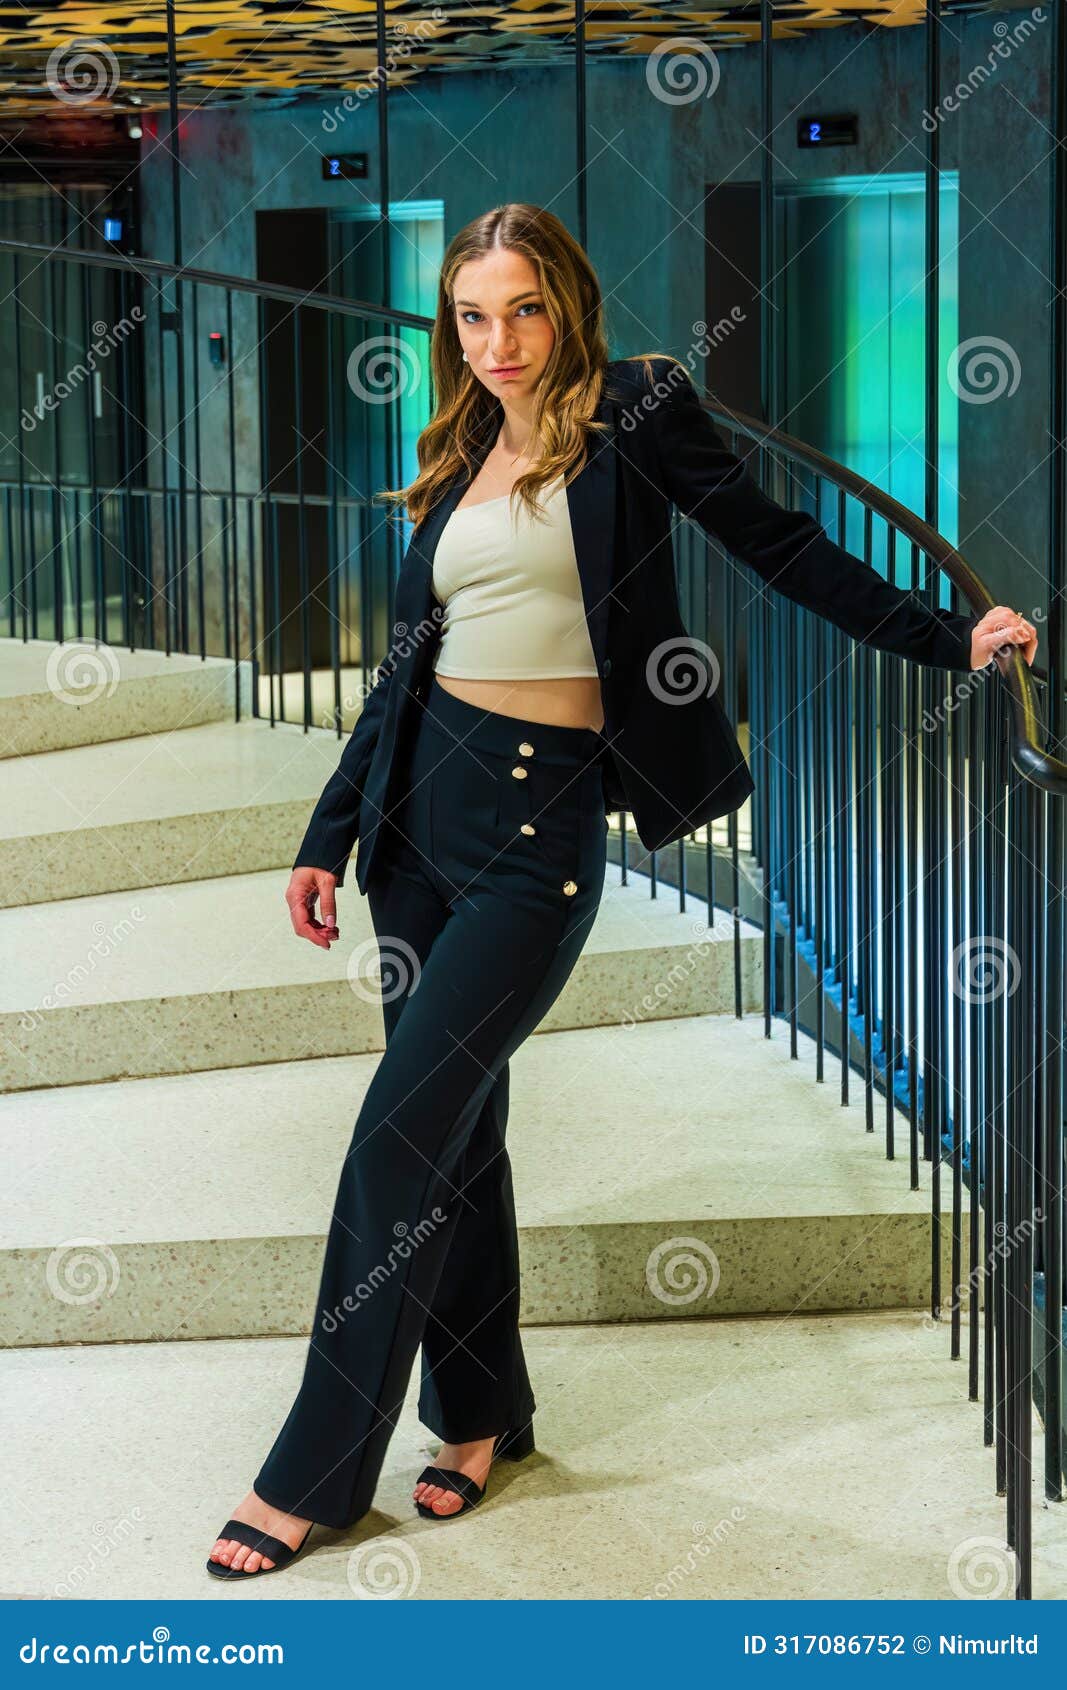 beautiful woman in classic suit on spiral staircase holding bannister